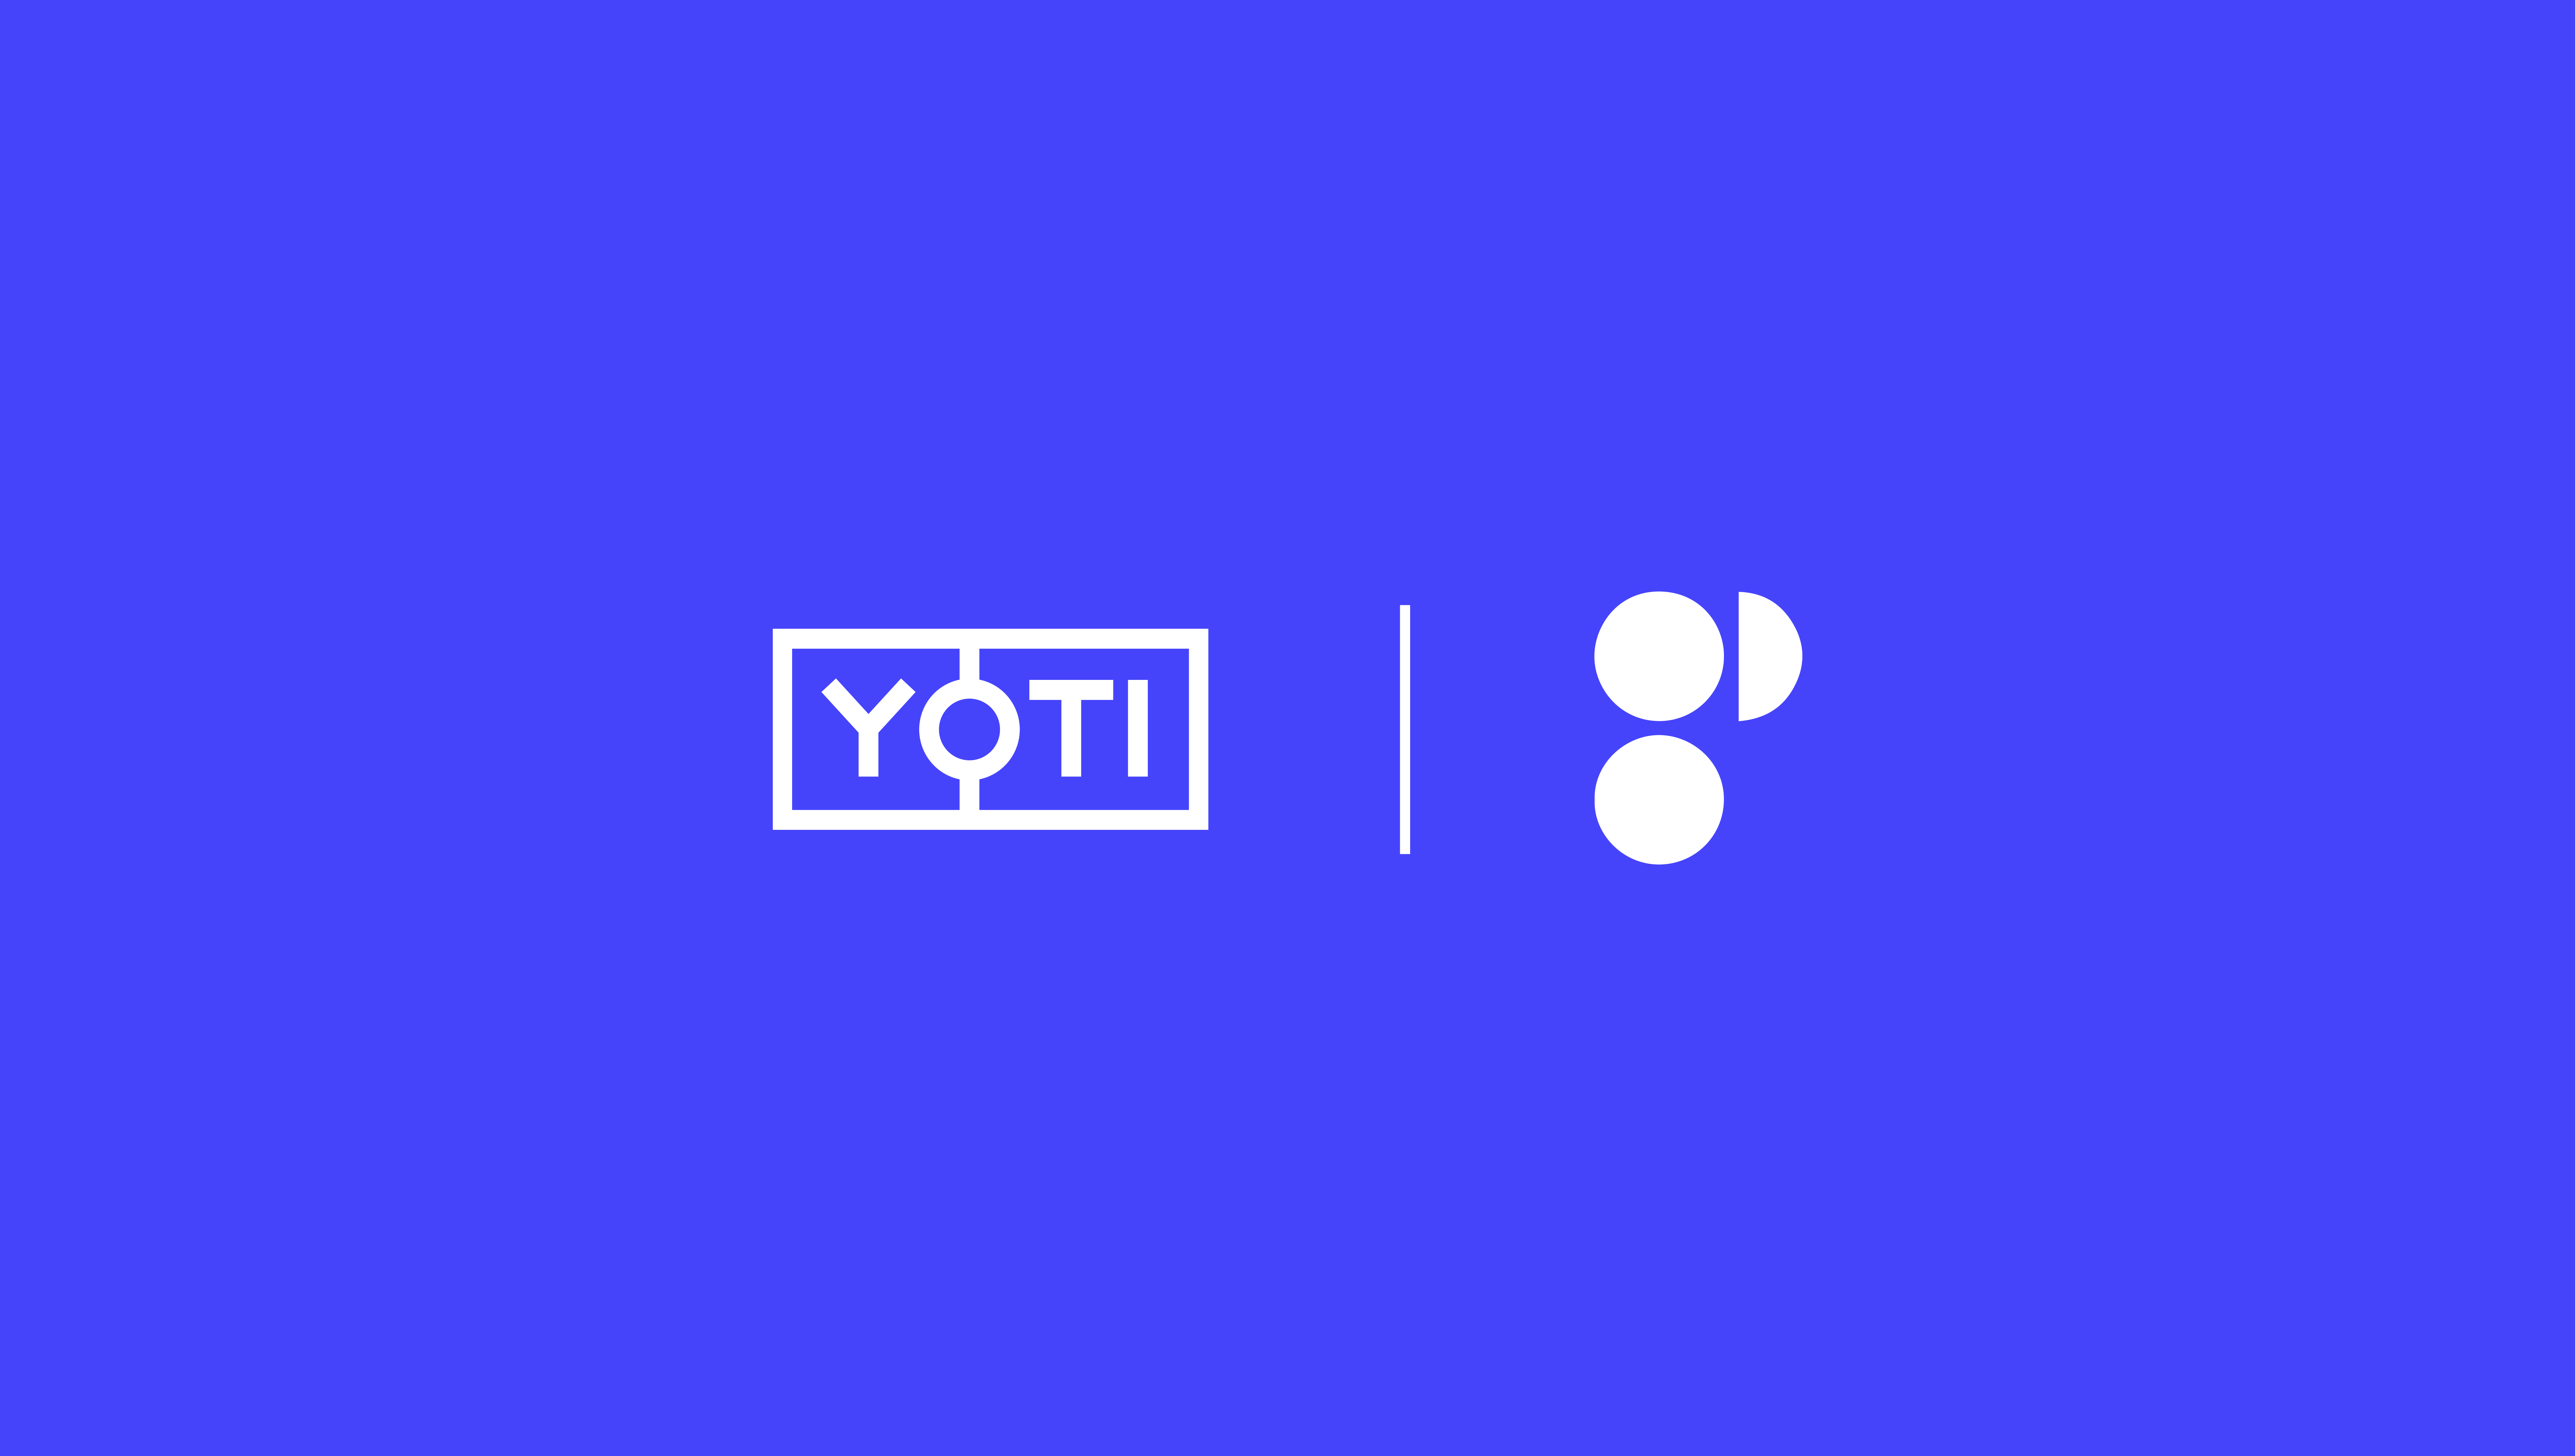 Yoti and BitcoinPoint logos presented together